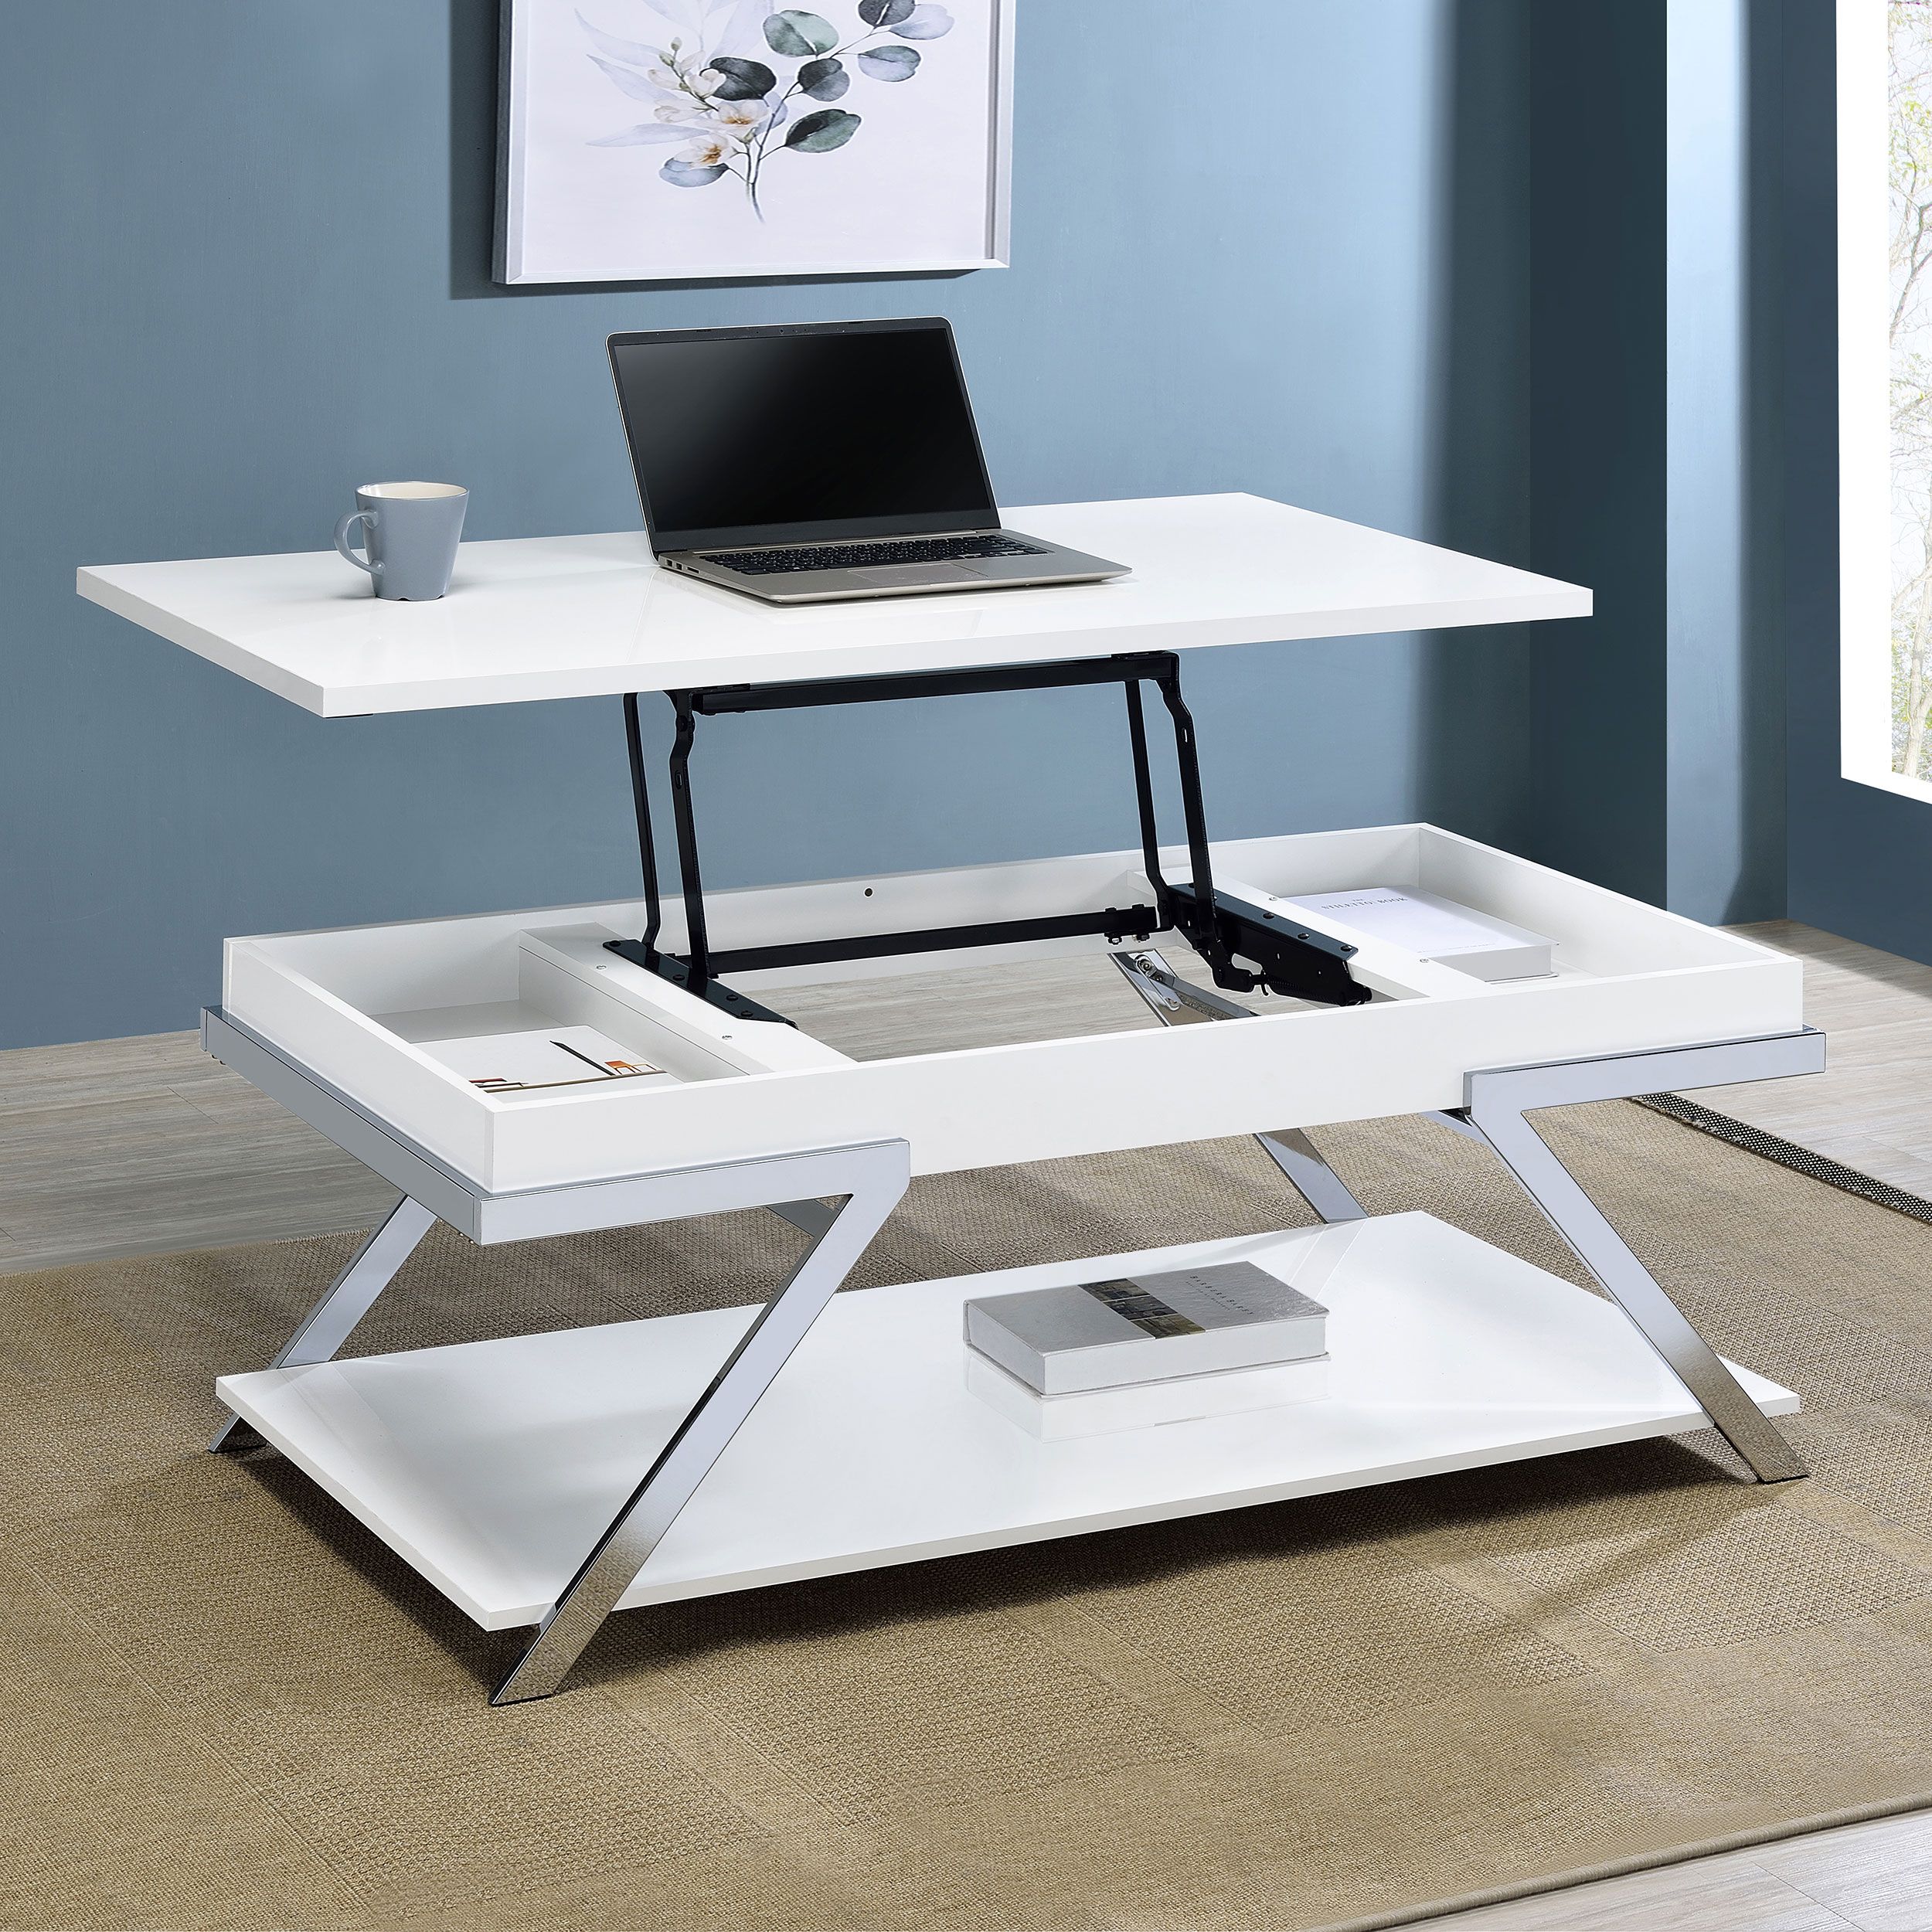 Marcia Wood Rectangular Lift Top Coffee Table White High Glo Within High Gloss Lift Top Coffee Tables (View 9 of 15)